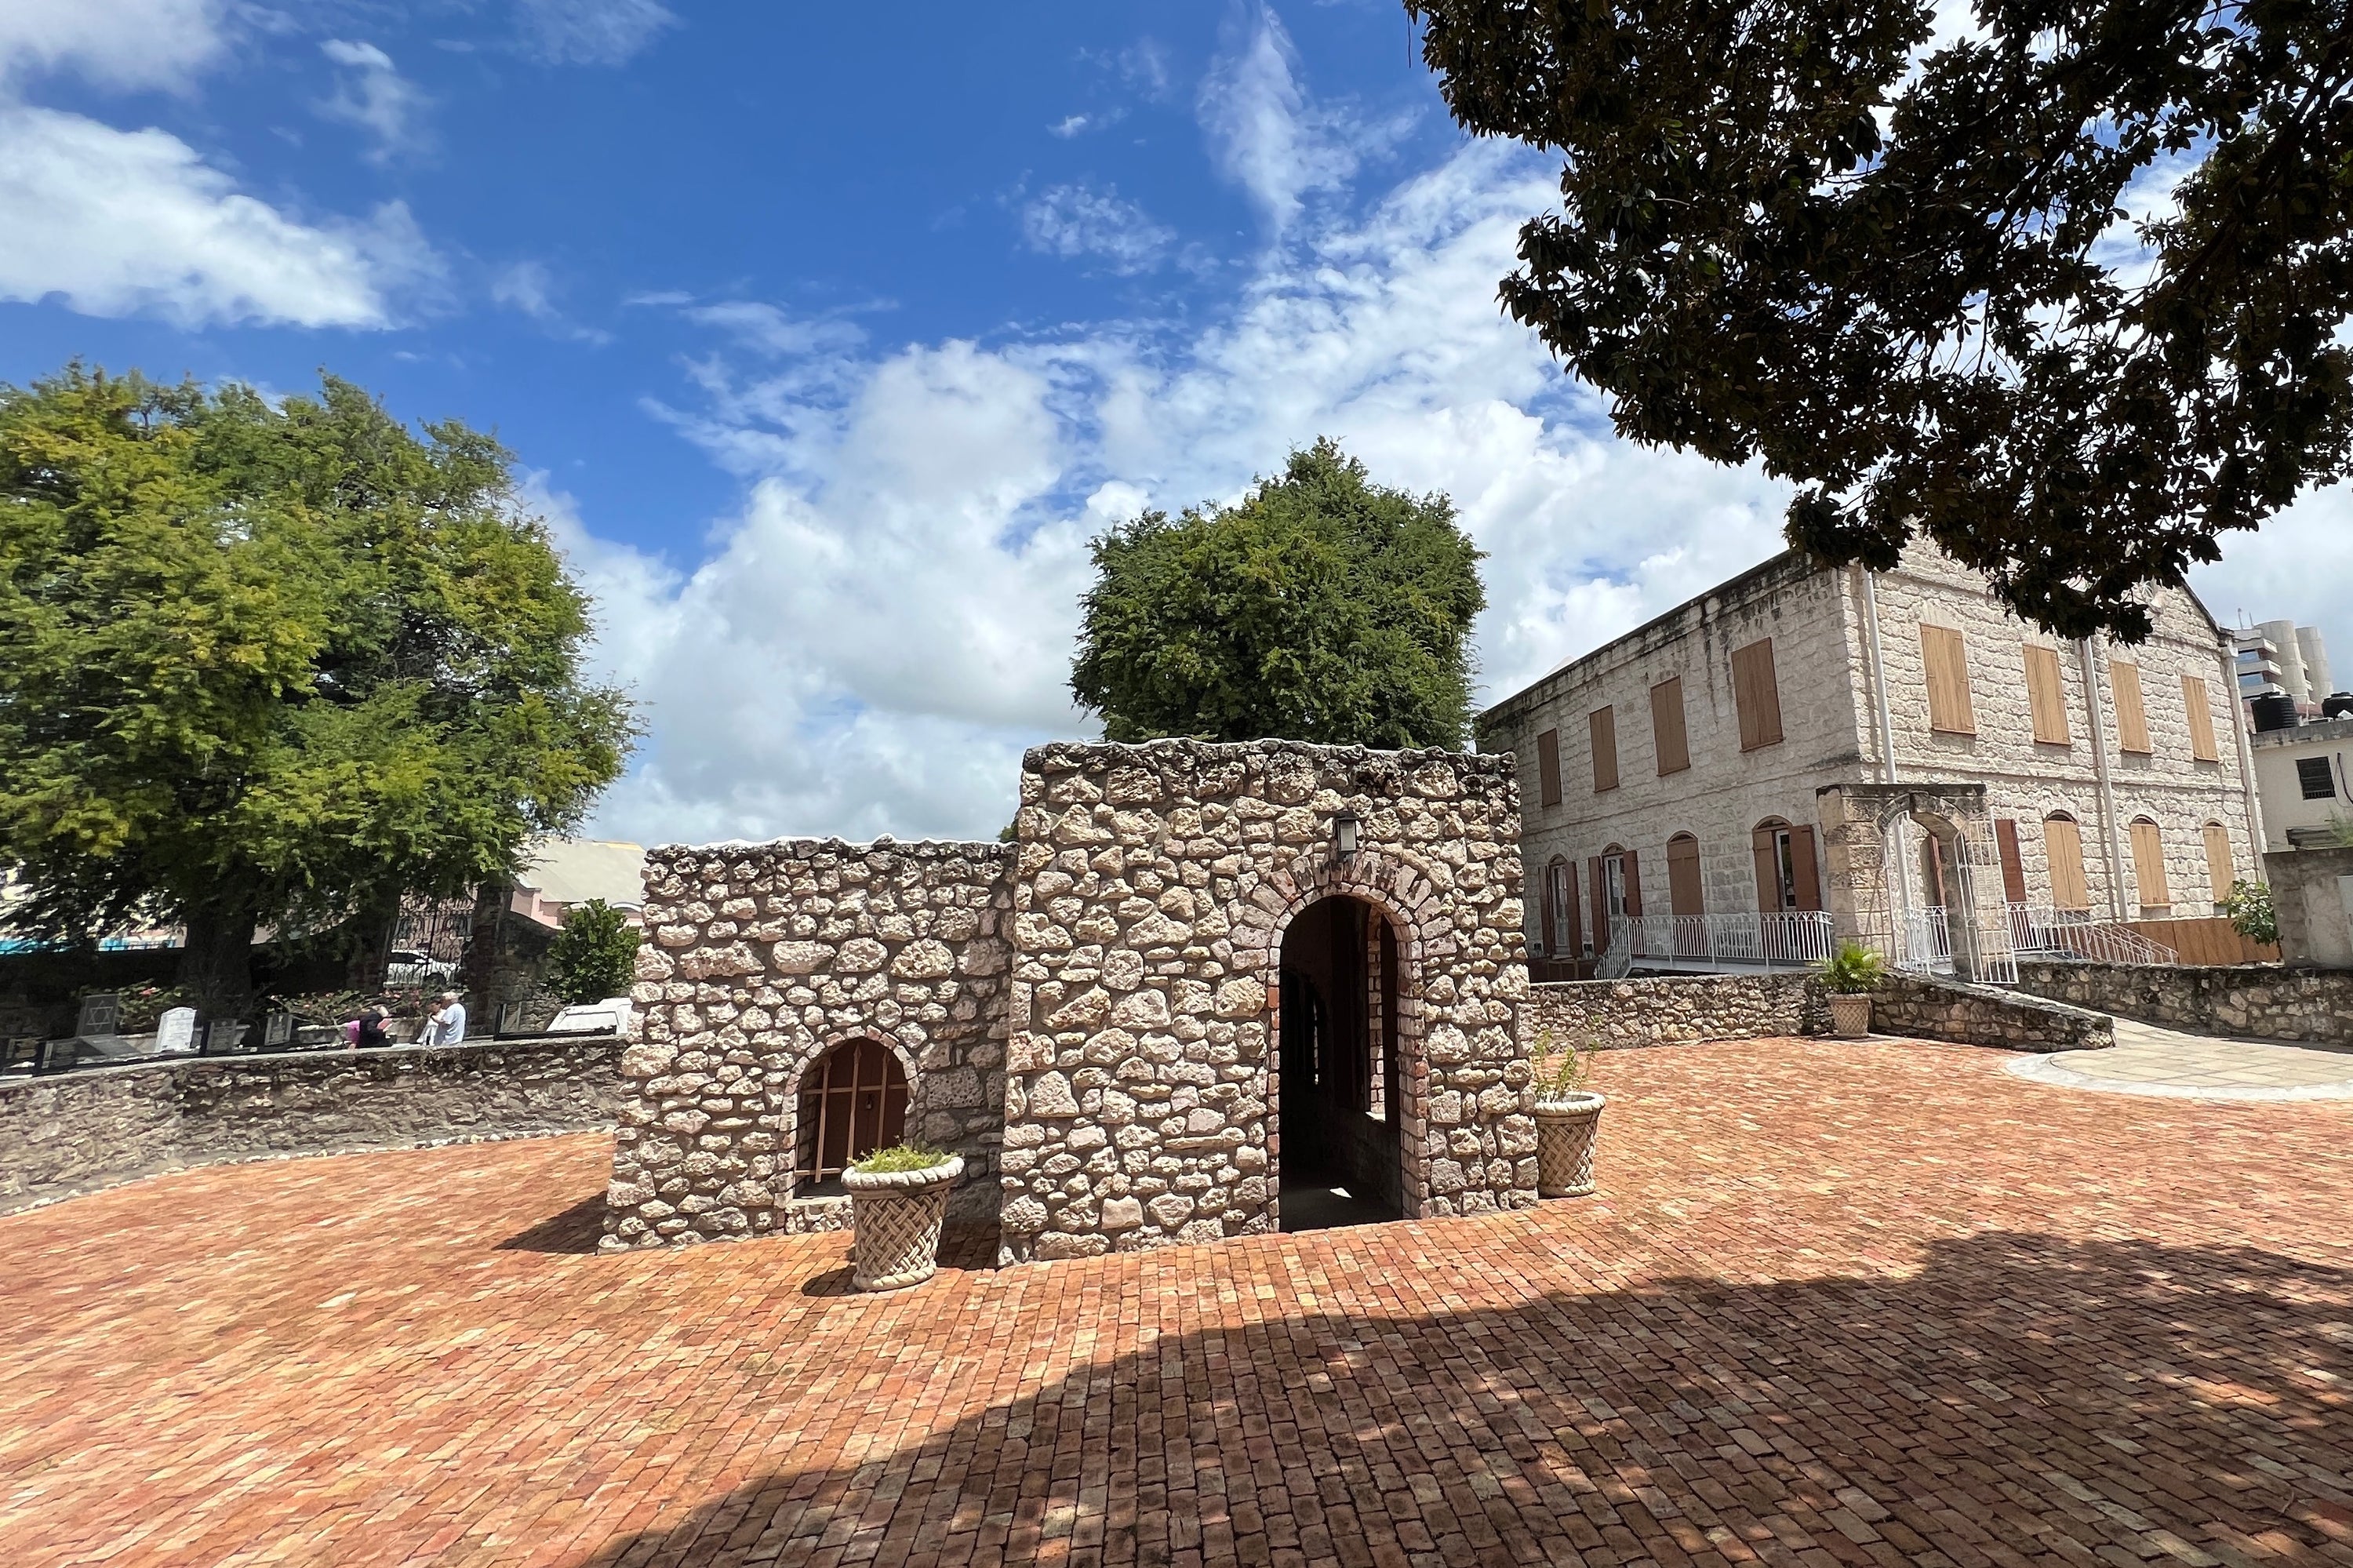 Visit the oldest Synagogue in the western hemisphere.  Learn about the history of Jews in the Caribbean and North America.